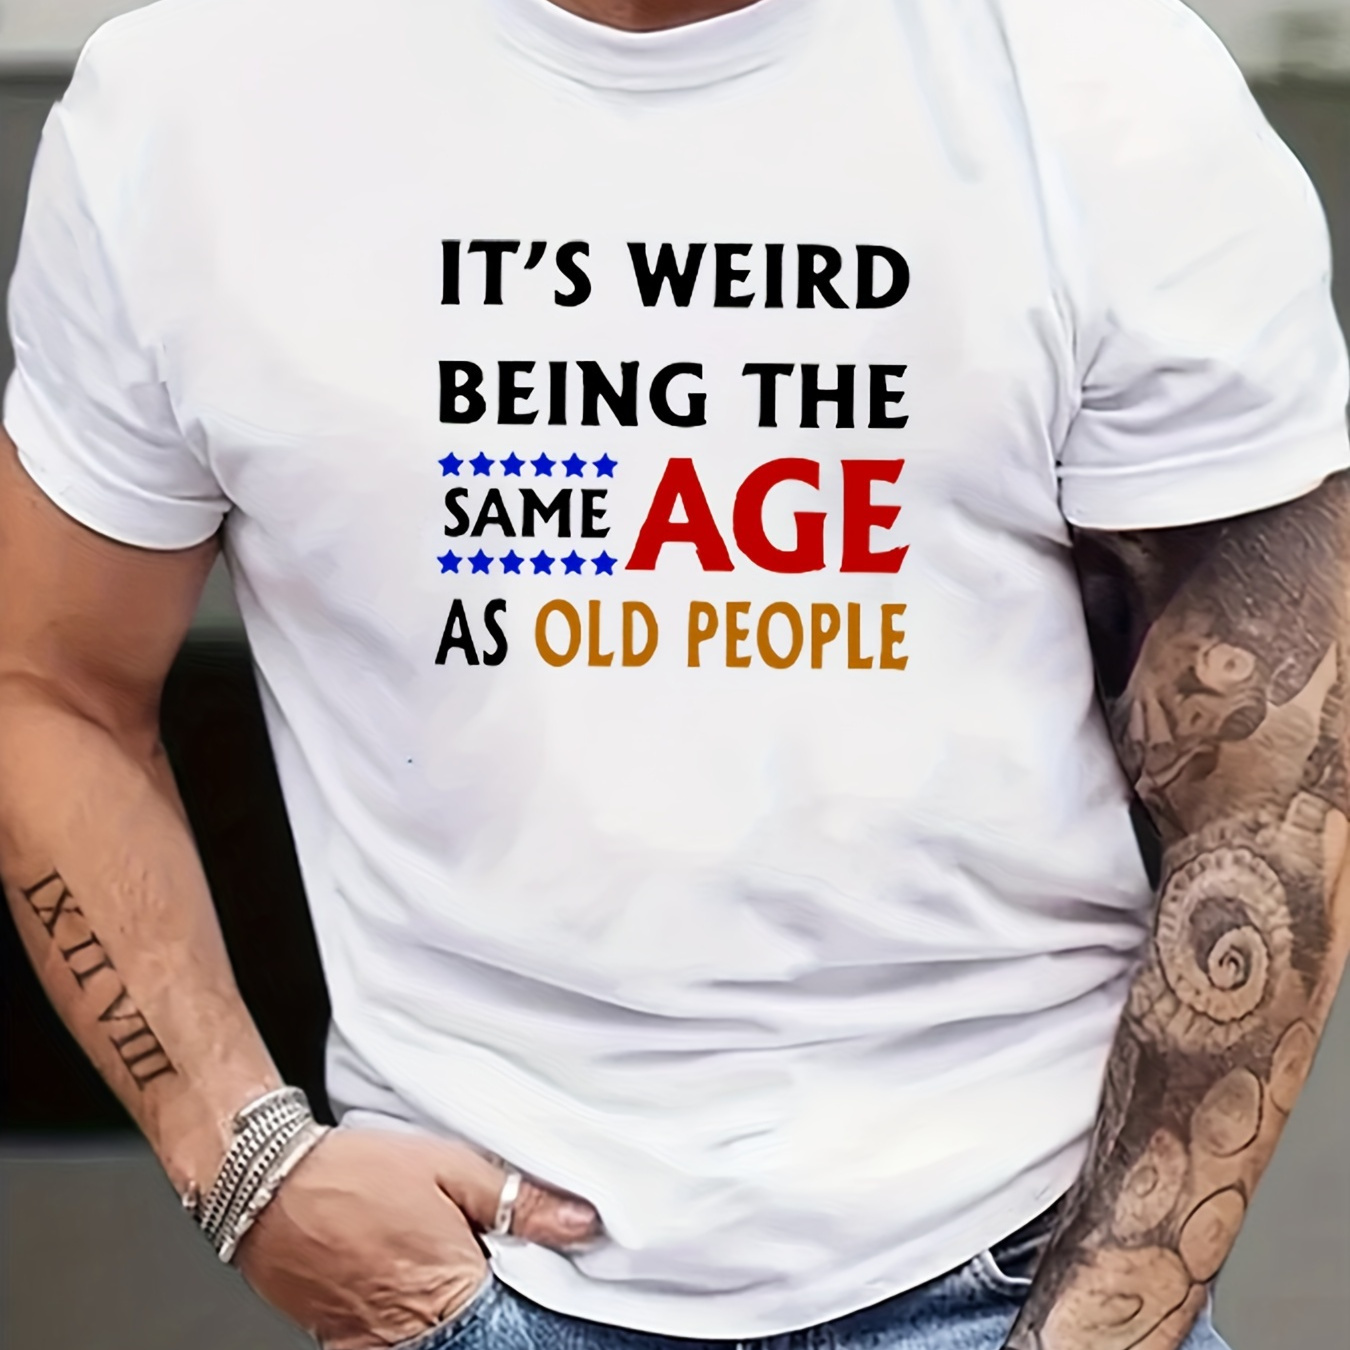 

it's Weird Being The Same Age As Old People" Letters Print Casual Crew Neck Short Sleeves For Men, Comfy Casual Summer T-shirt For Daily Wear Work Out And Vacation Resorts